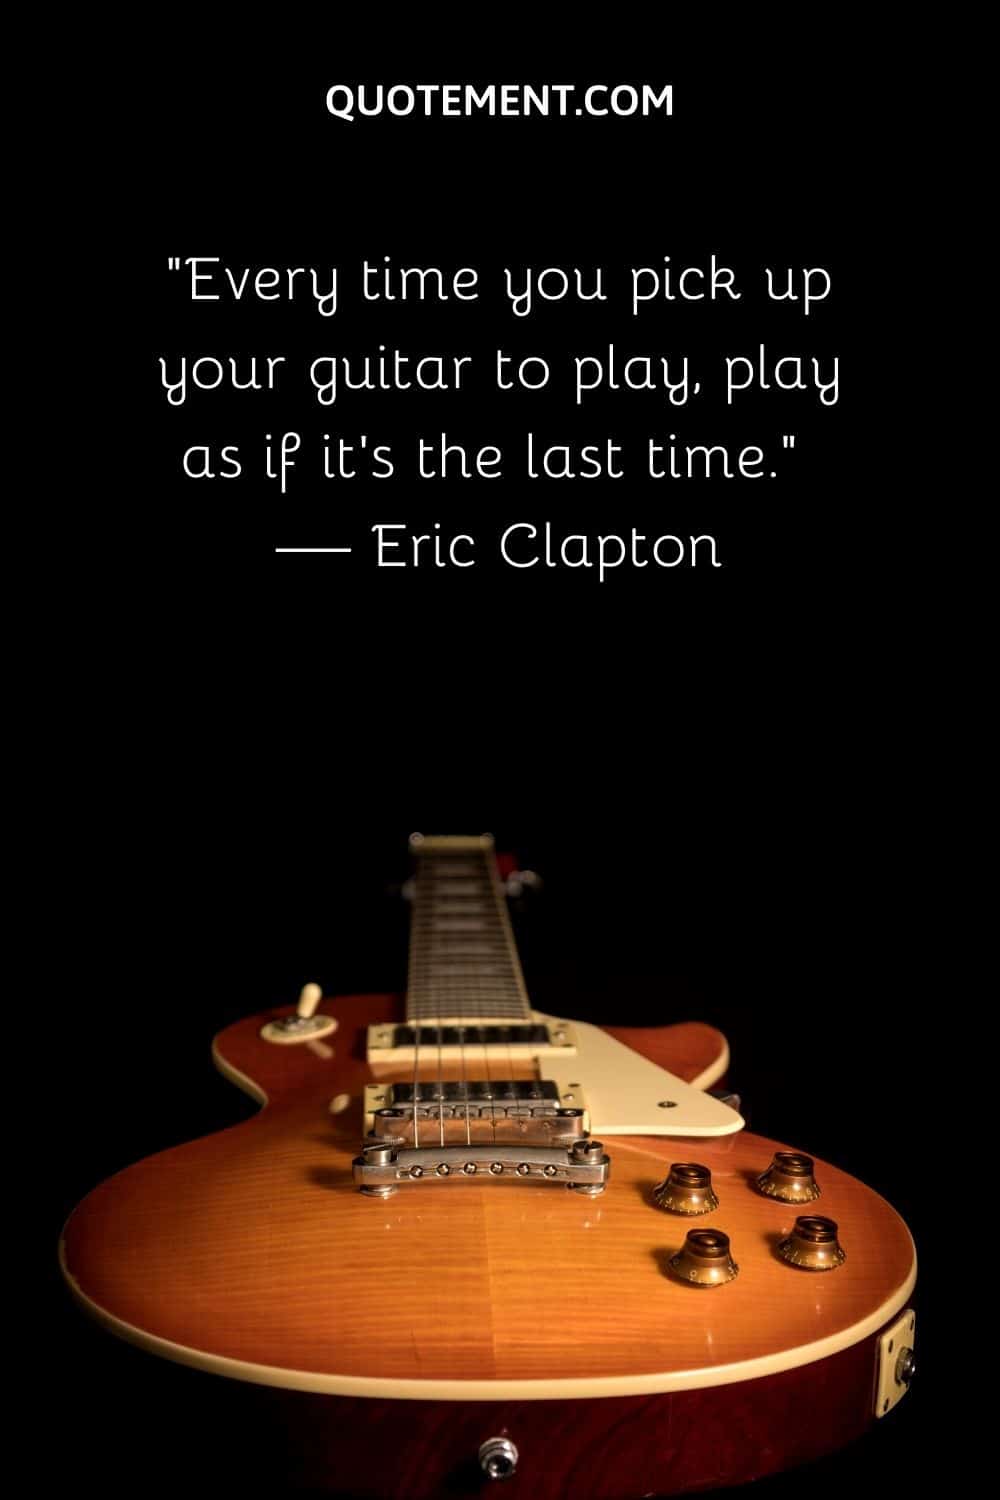 Every time you pick up your guitar to play, play as if it’s the last time.” — Eric Clapton